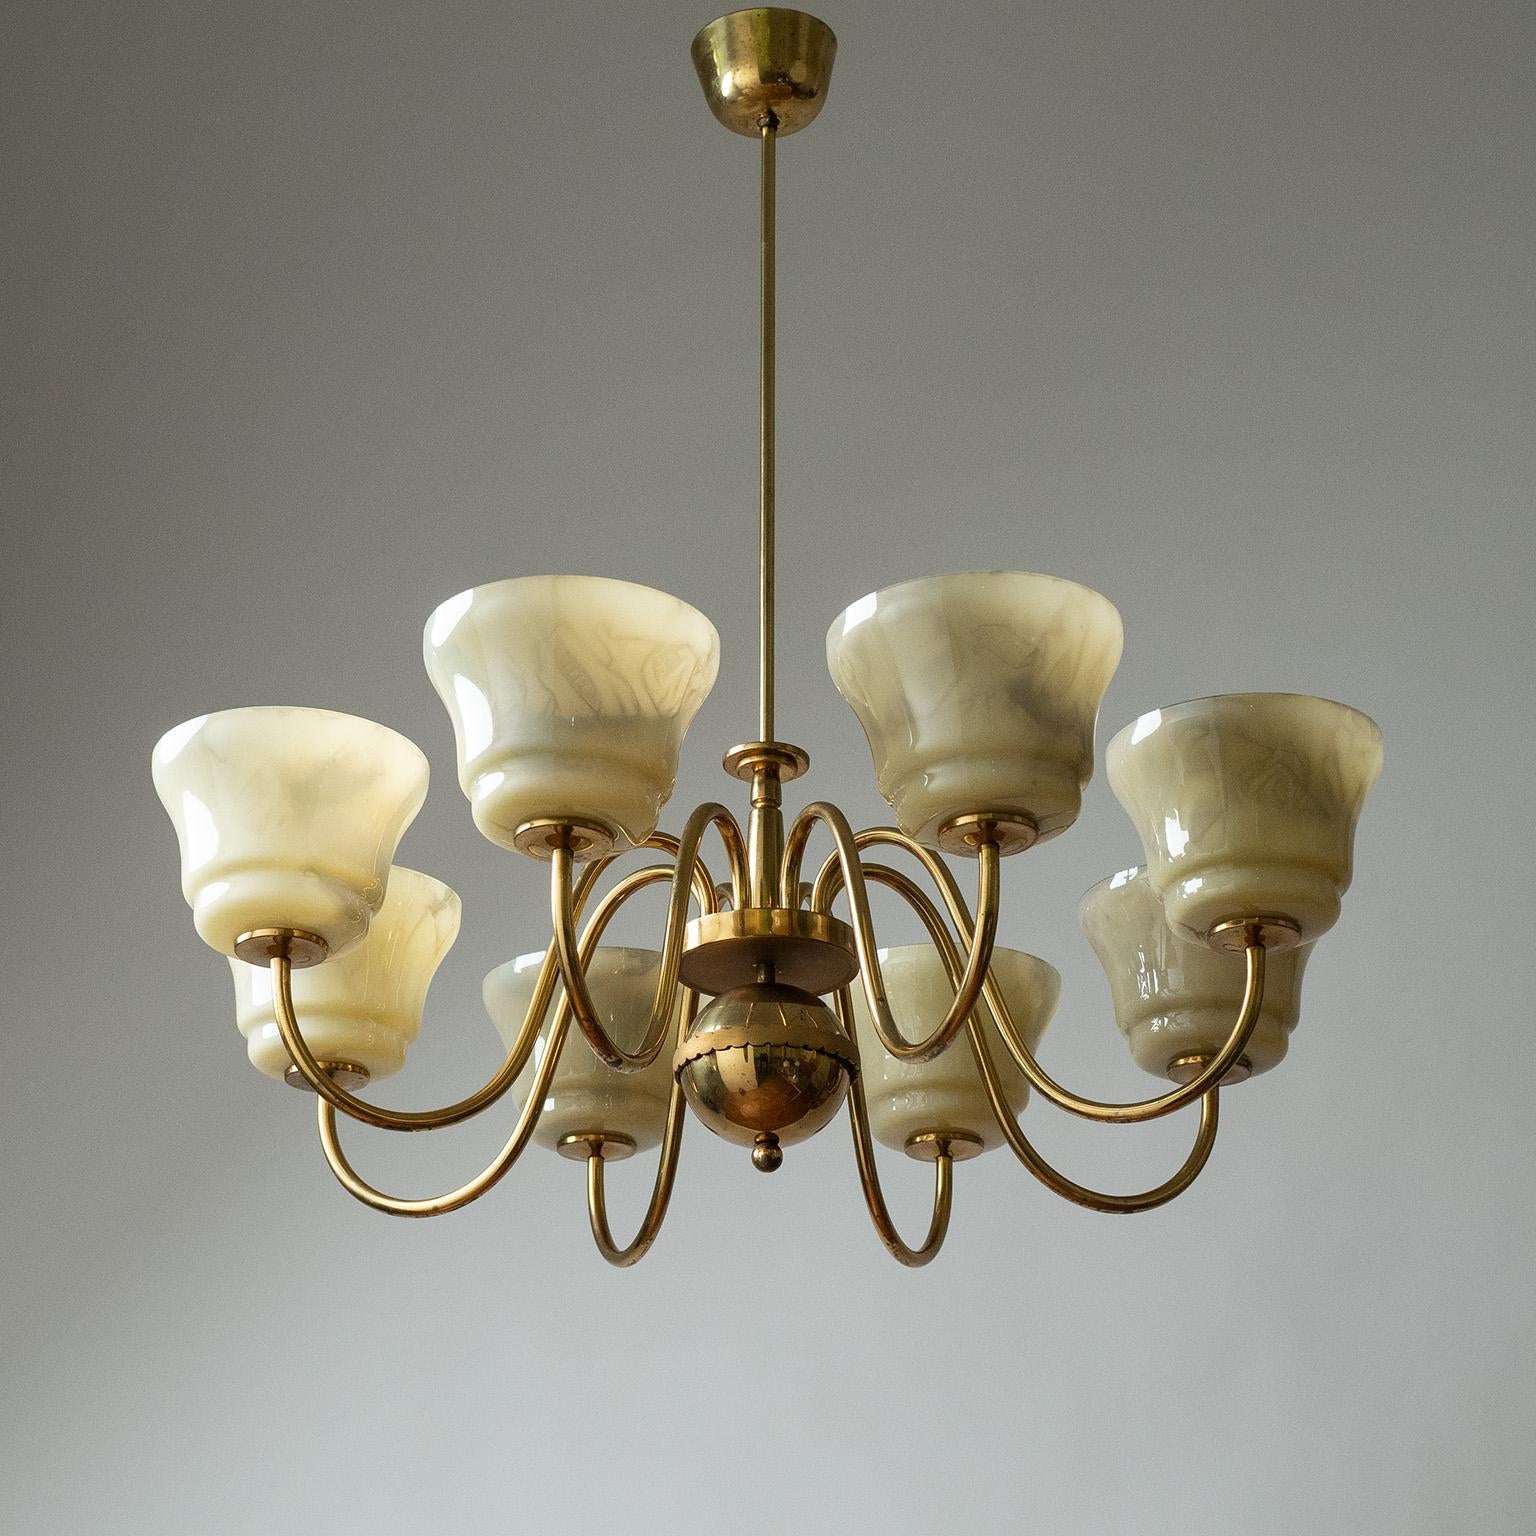 Large eight-arm brass chandelier with enameled glass diffusers from the 1940s. Elegantly curved brass arms with a nicely styled centerpiece. The blown glass diffusers are enameled on the inside for a marbled effect (comes with two spare glasses).